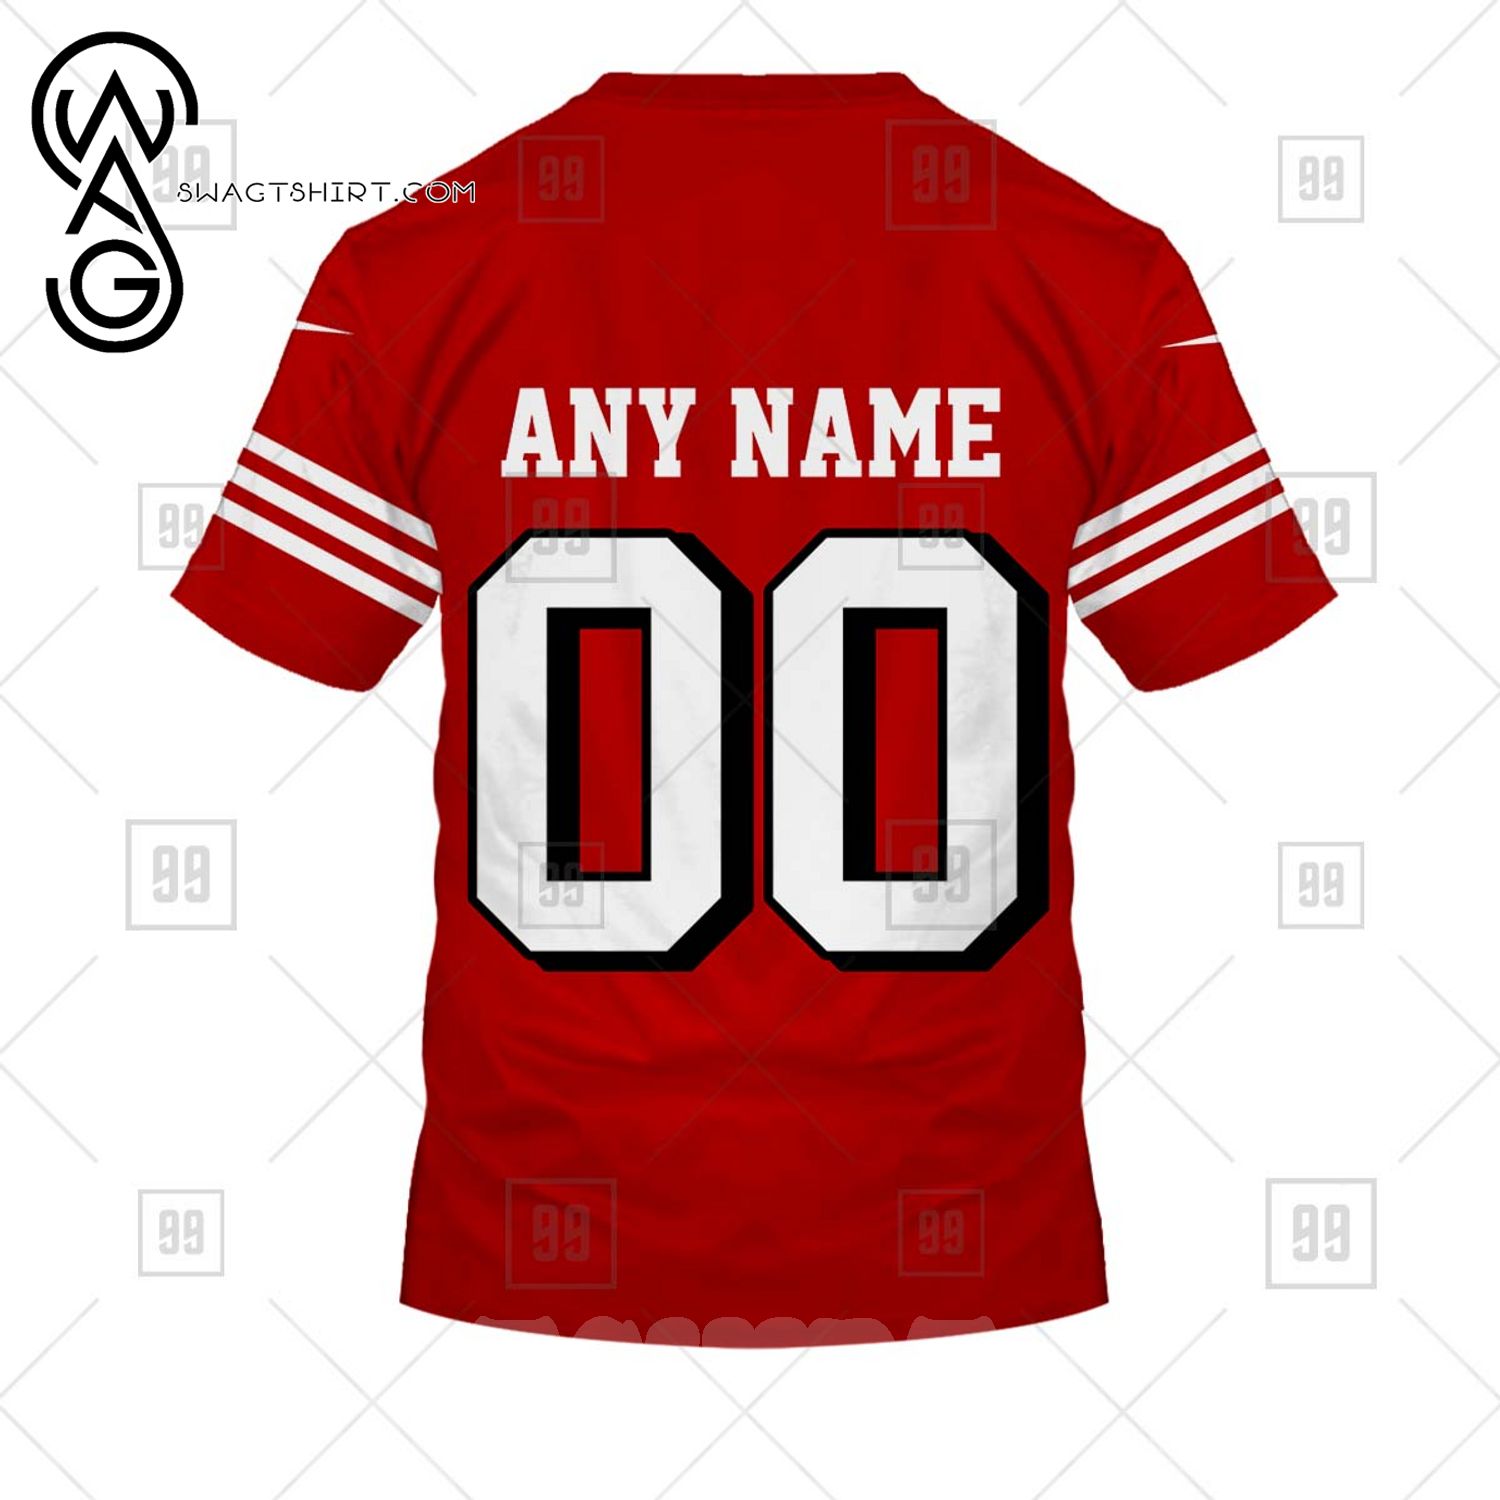 The best selling] Personalized NFL San Francisco 49ers Alternate